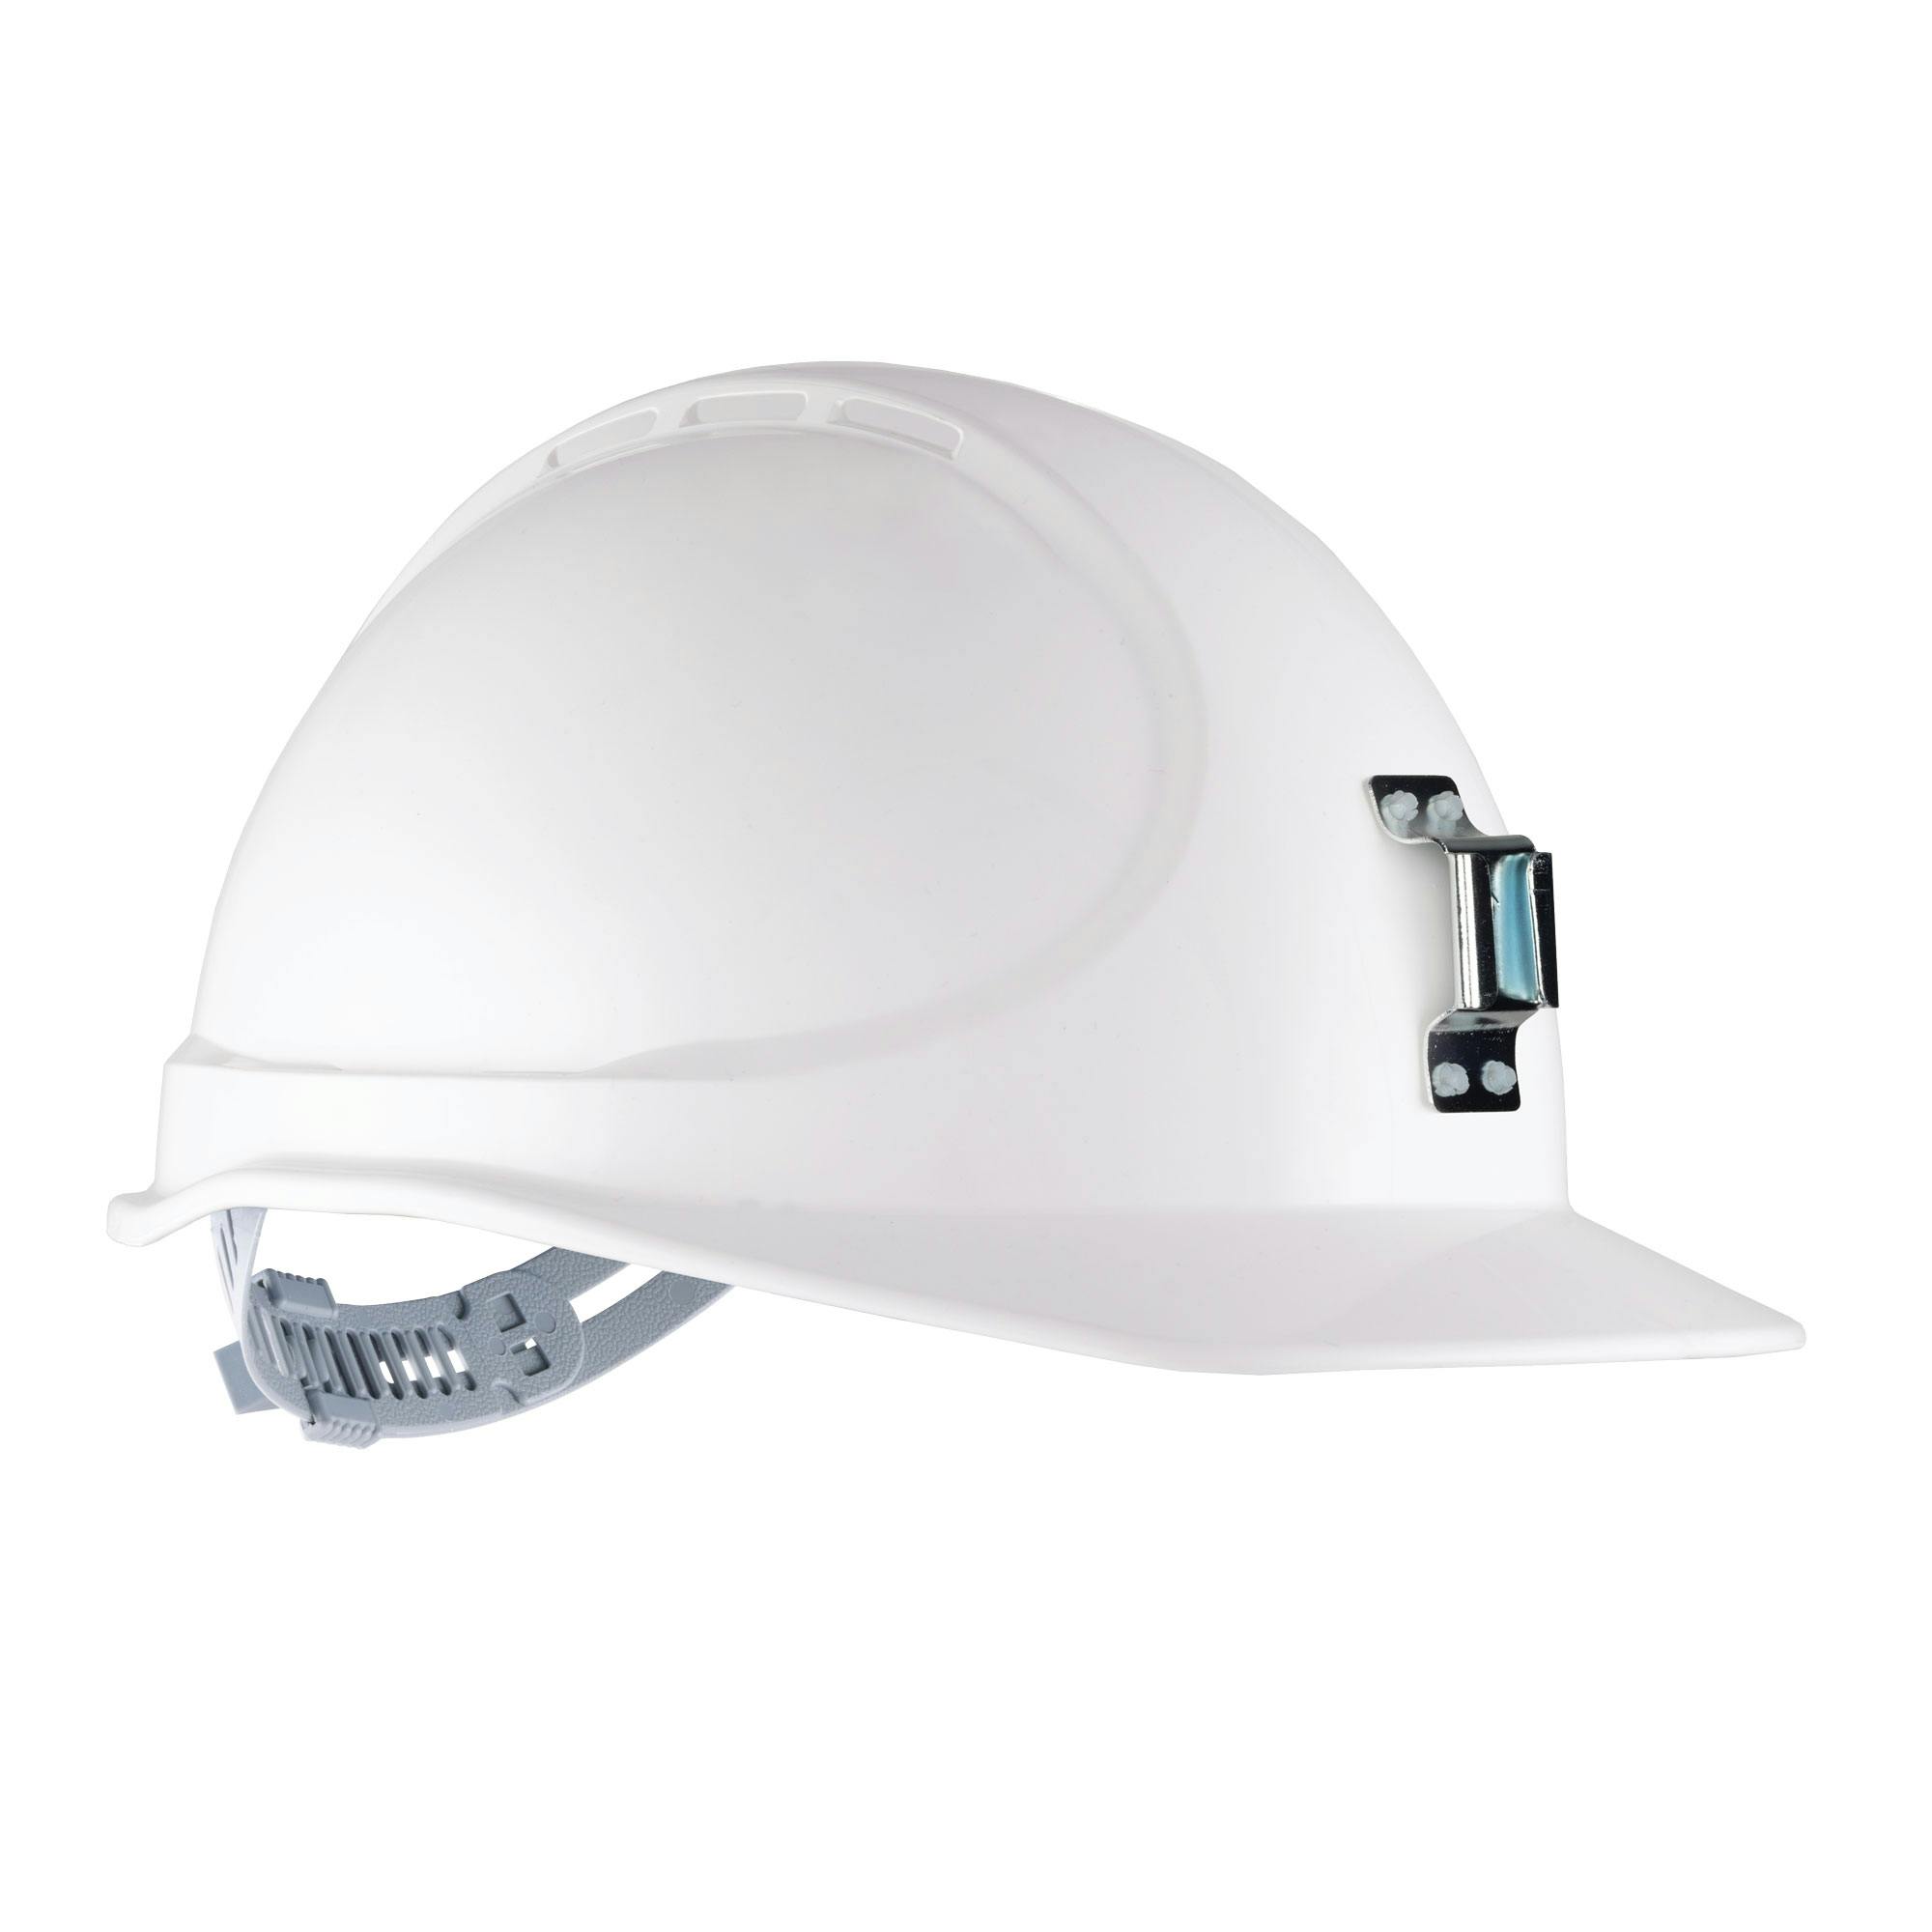 Force360 GTE10 ABS Non-Vented Miners Hard Hat With Slide Lock Harness, Type1 (White)_2